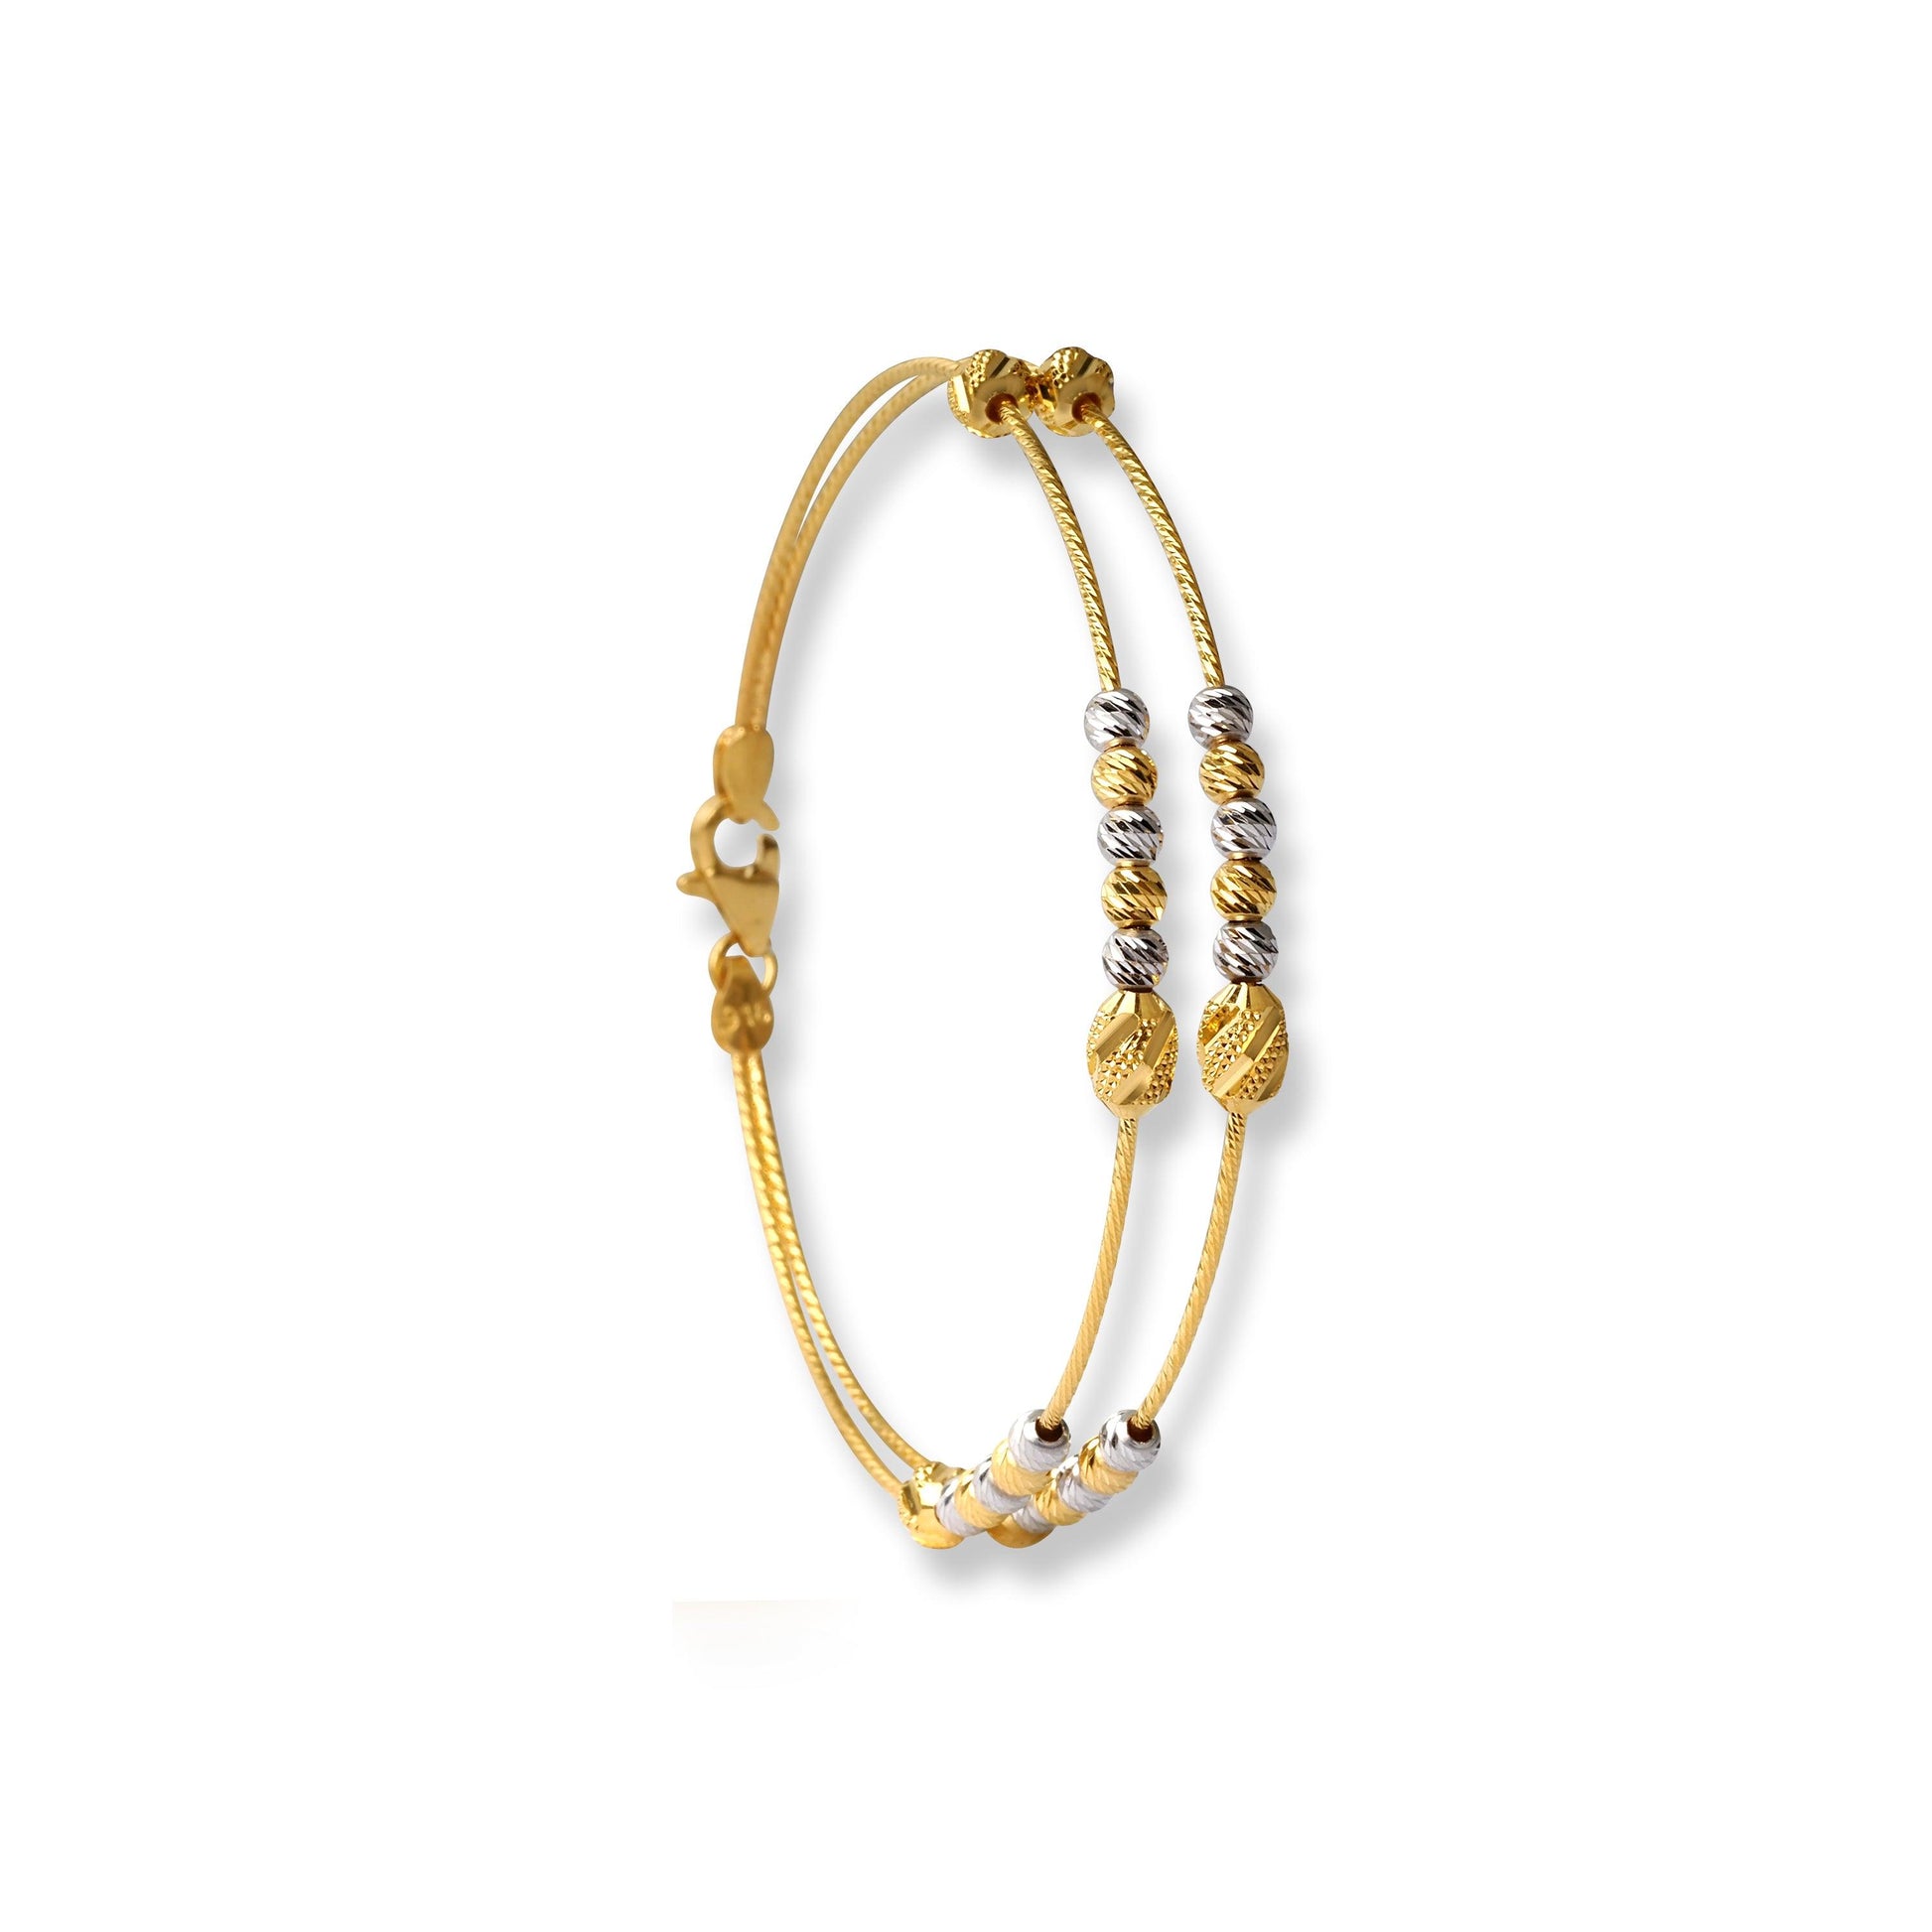 22ct Gold Rhodium Plated Beads Bangle With Rounded Trigger Clasp (7.5g) B-8442 - Minar Jewellers